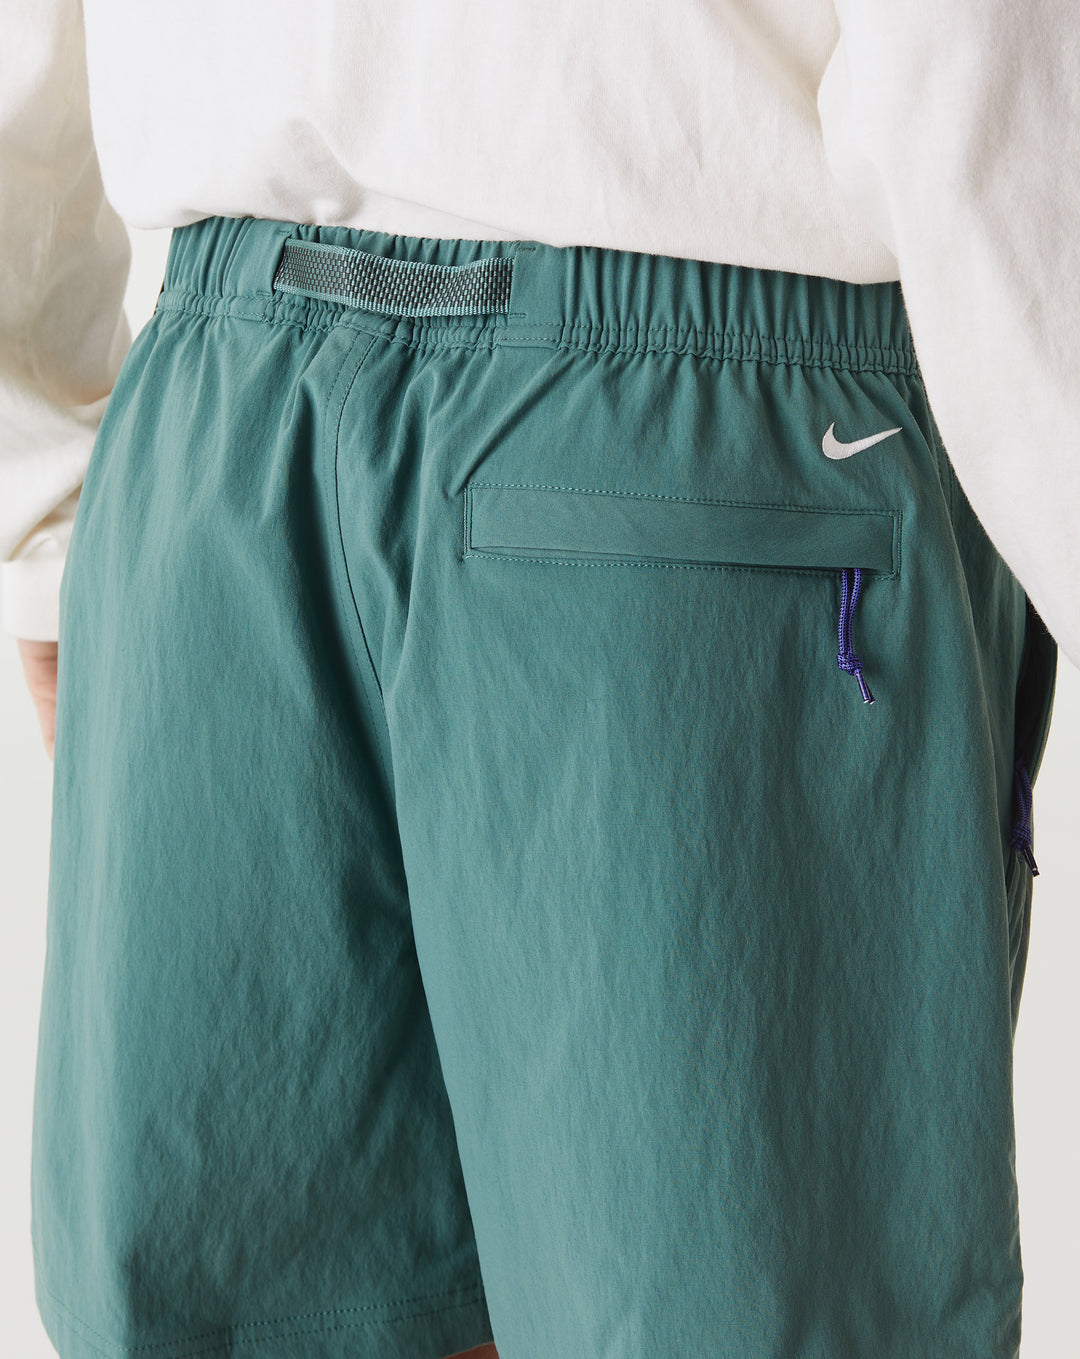 Nike These blue shorts from  - Cheap Urlfreeze Jordan outlet